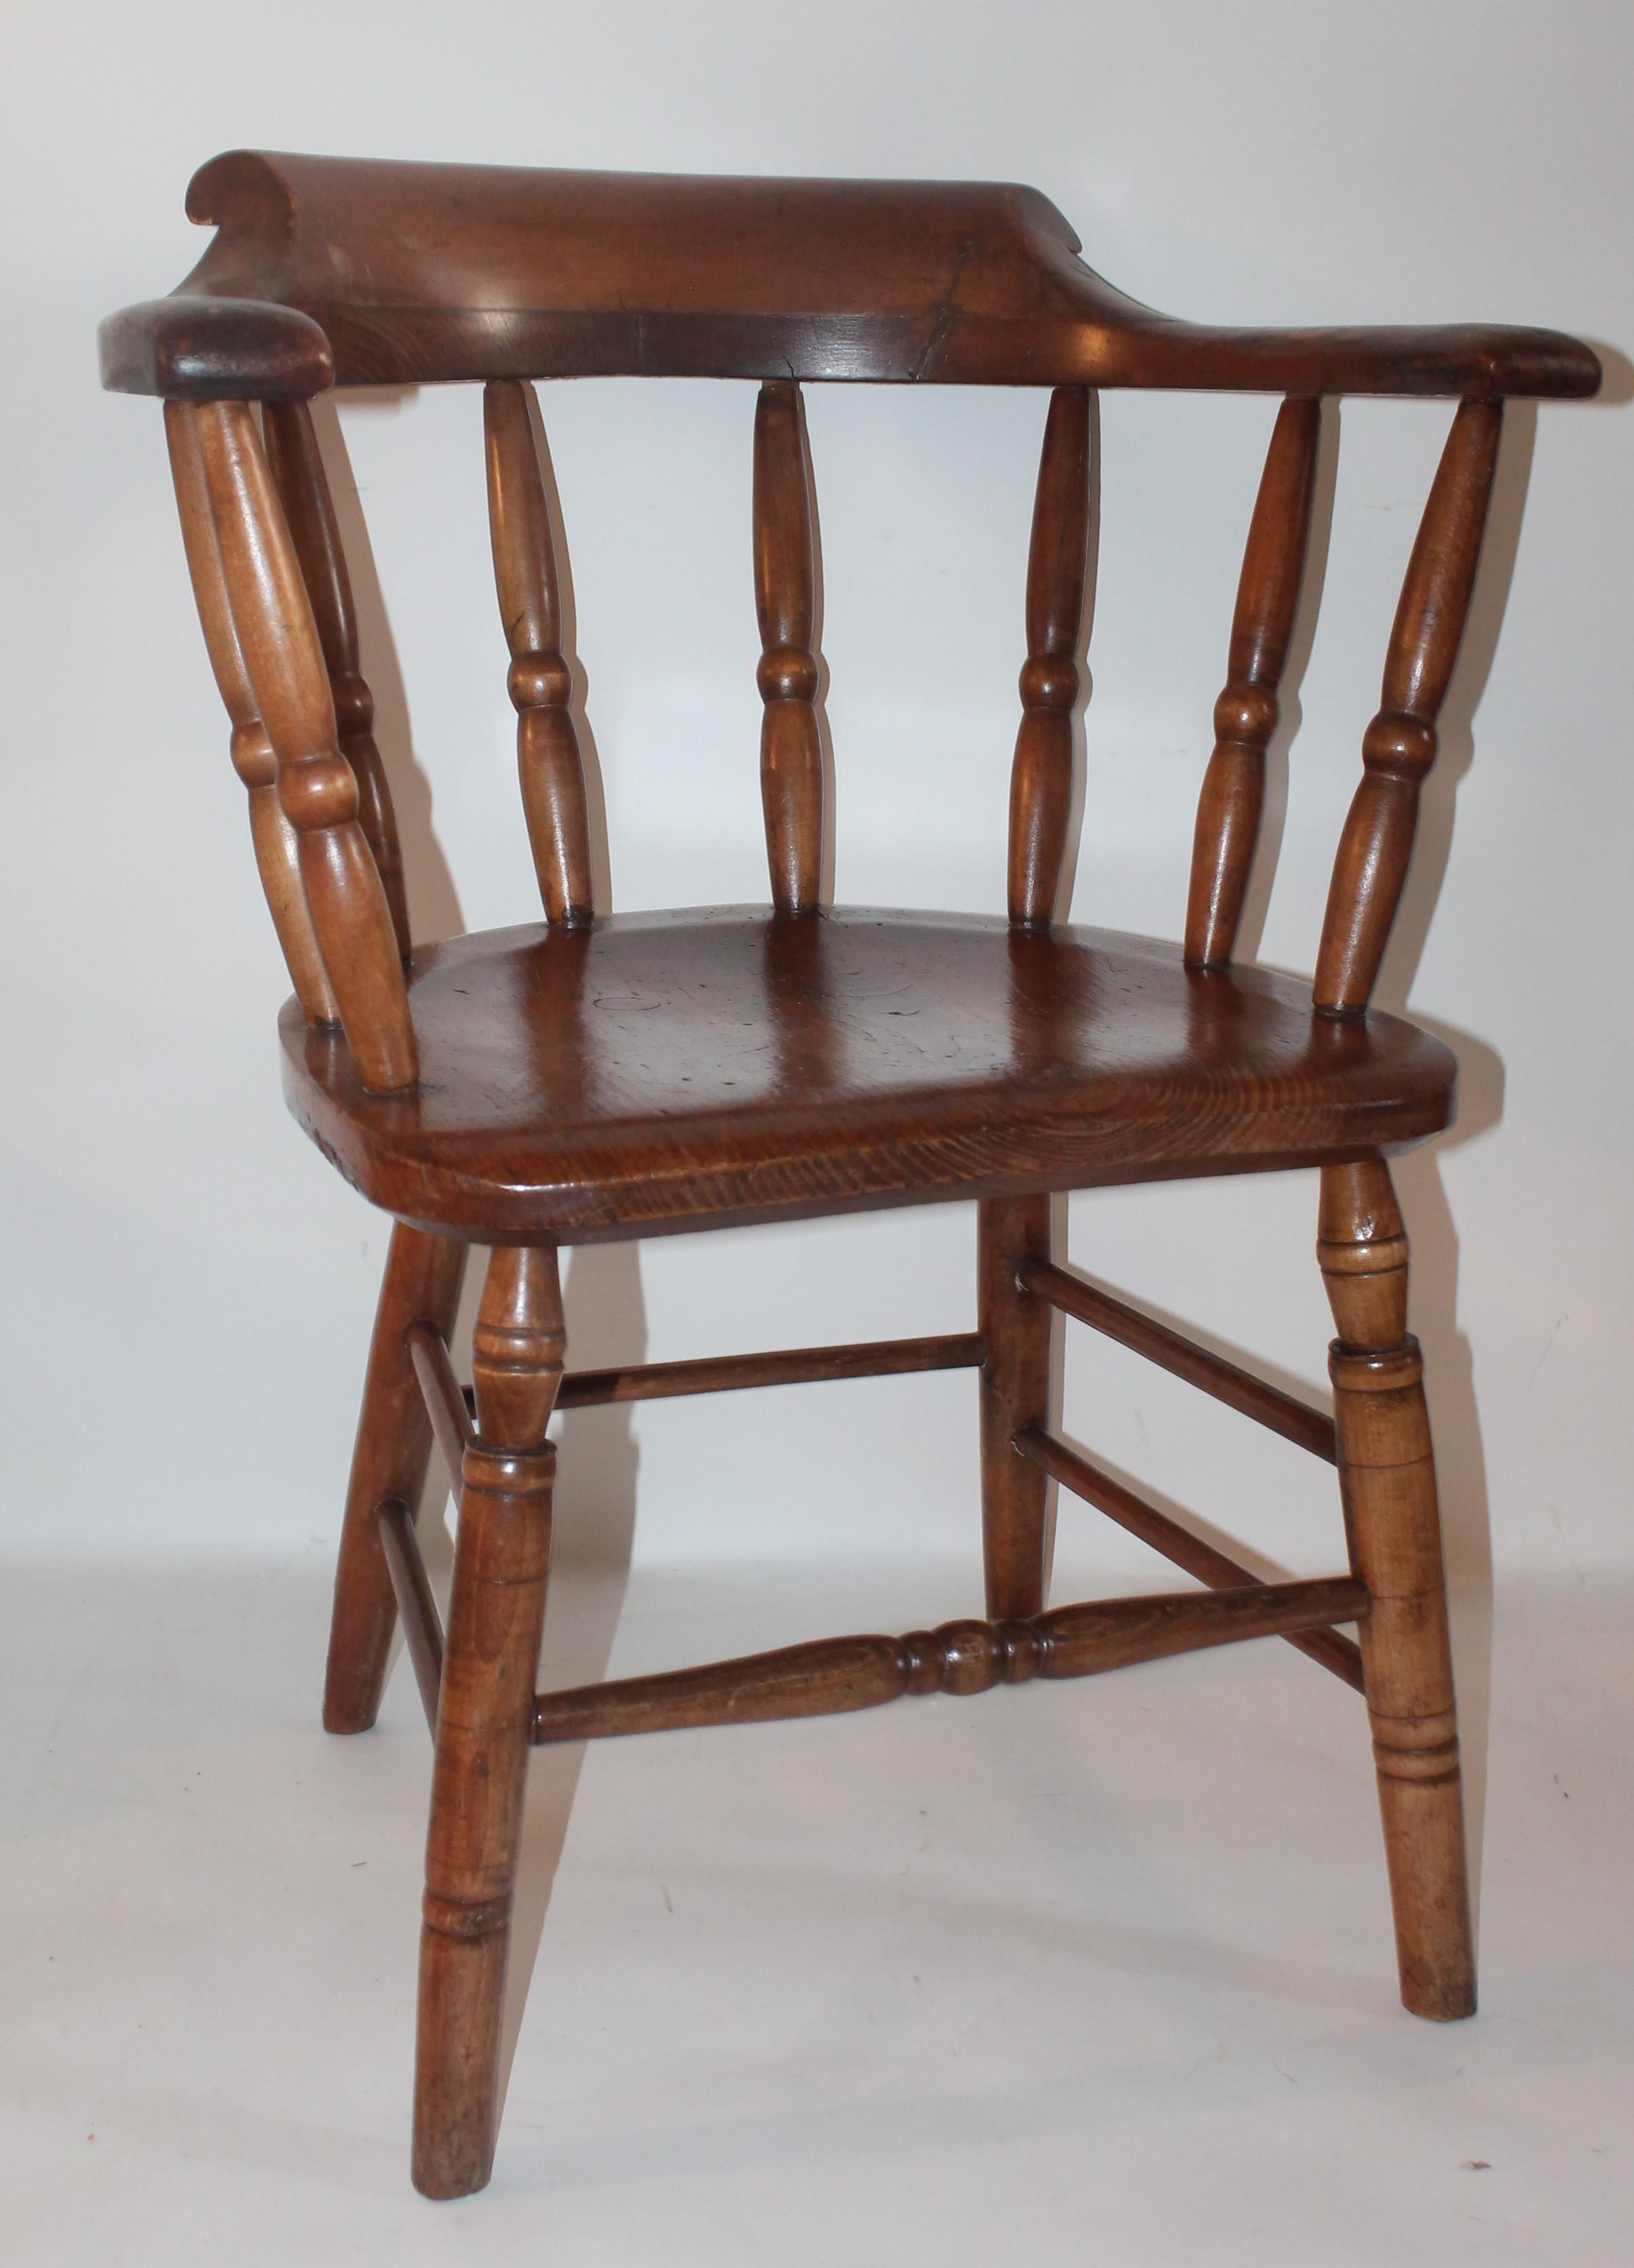 These fine New England pine captains chairs are in great condition and very strong and sturdy. These country captains chairs were often used in the old saloons and pubs in New England. They are in a old refinished or varnish and stain surface.